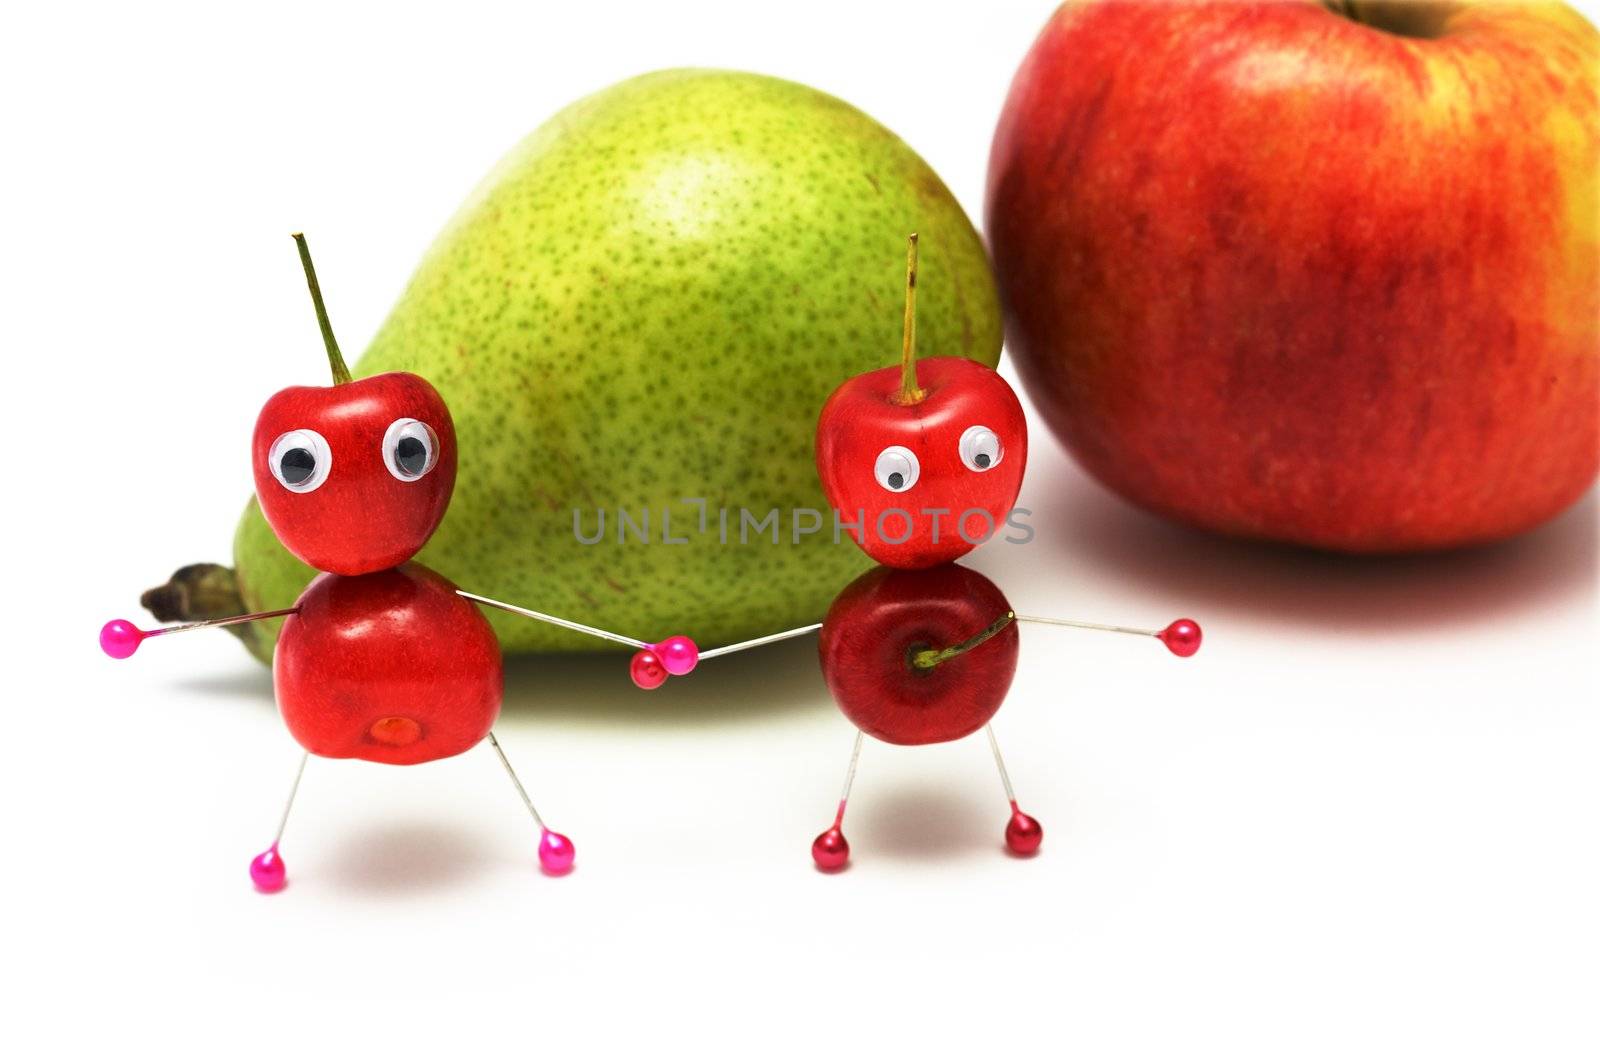 Two amusing little men from a sweet cherry on a background of a pear and an apple